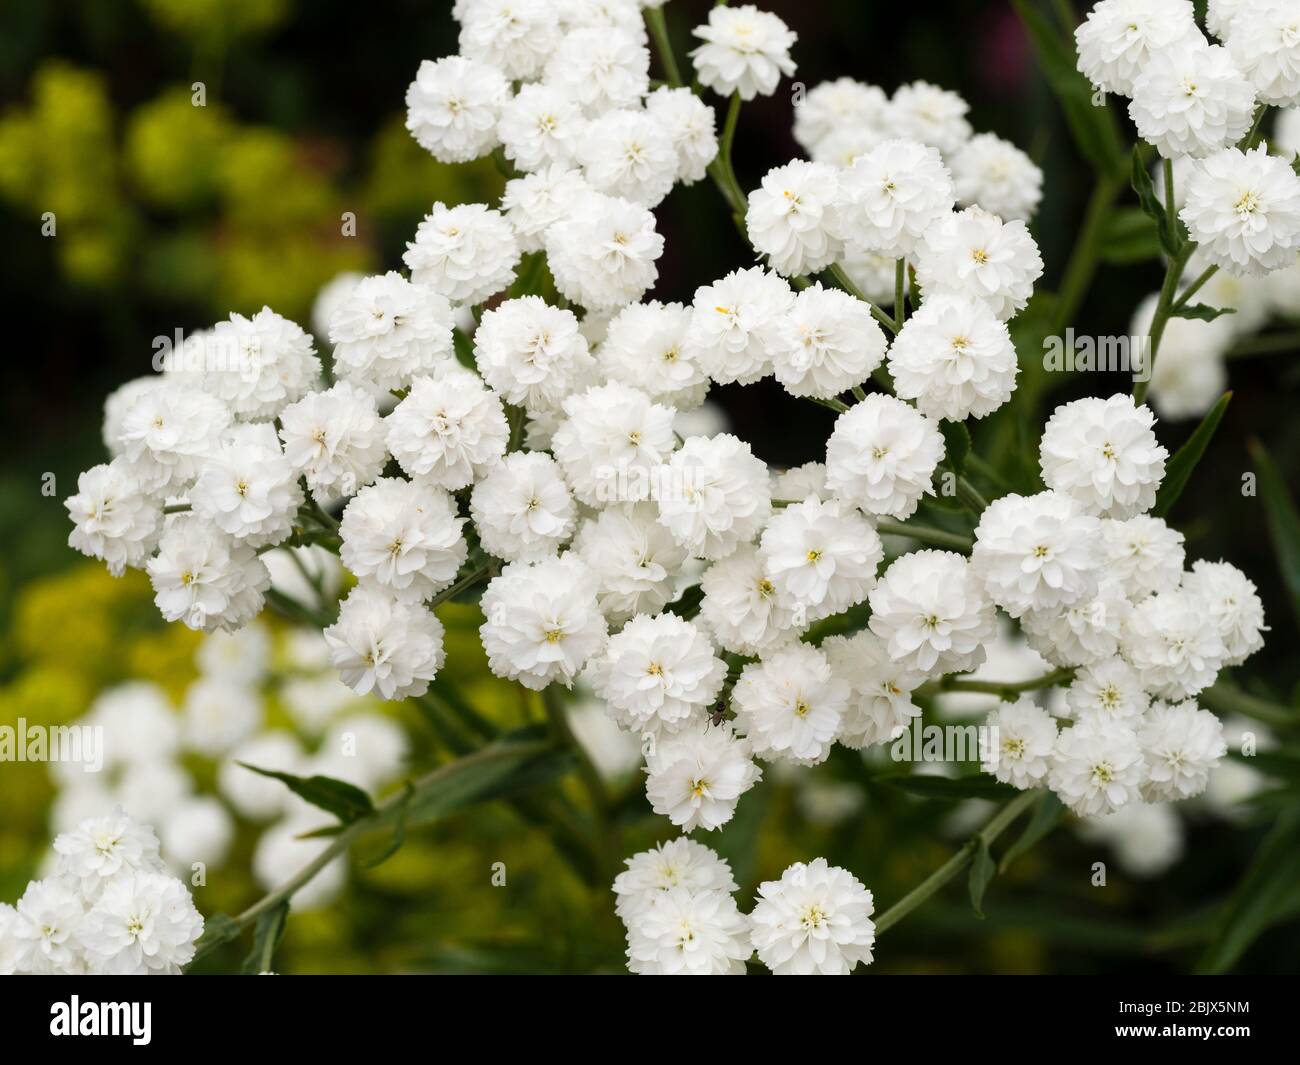 Massed white double flowers of the hardy annual baby's breath, Gypsophila paniculata 'Snowflake' Stock Photo